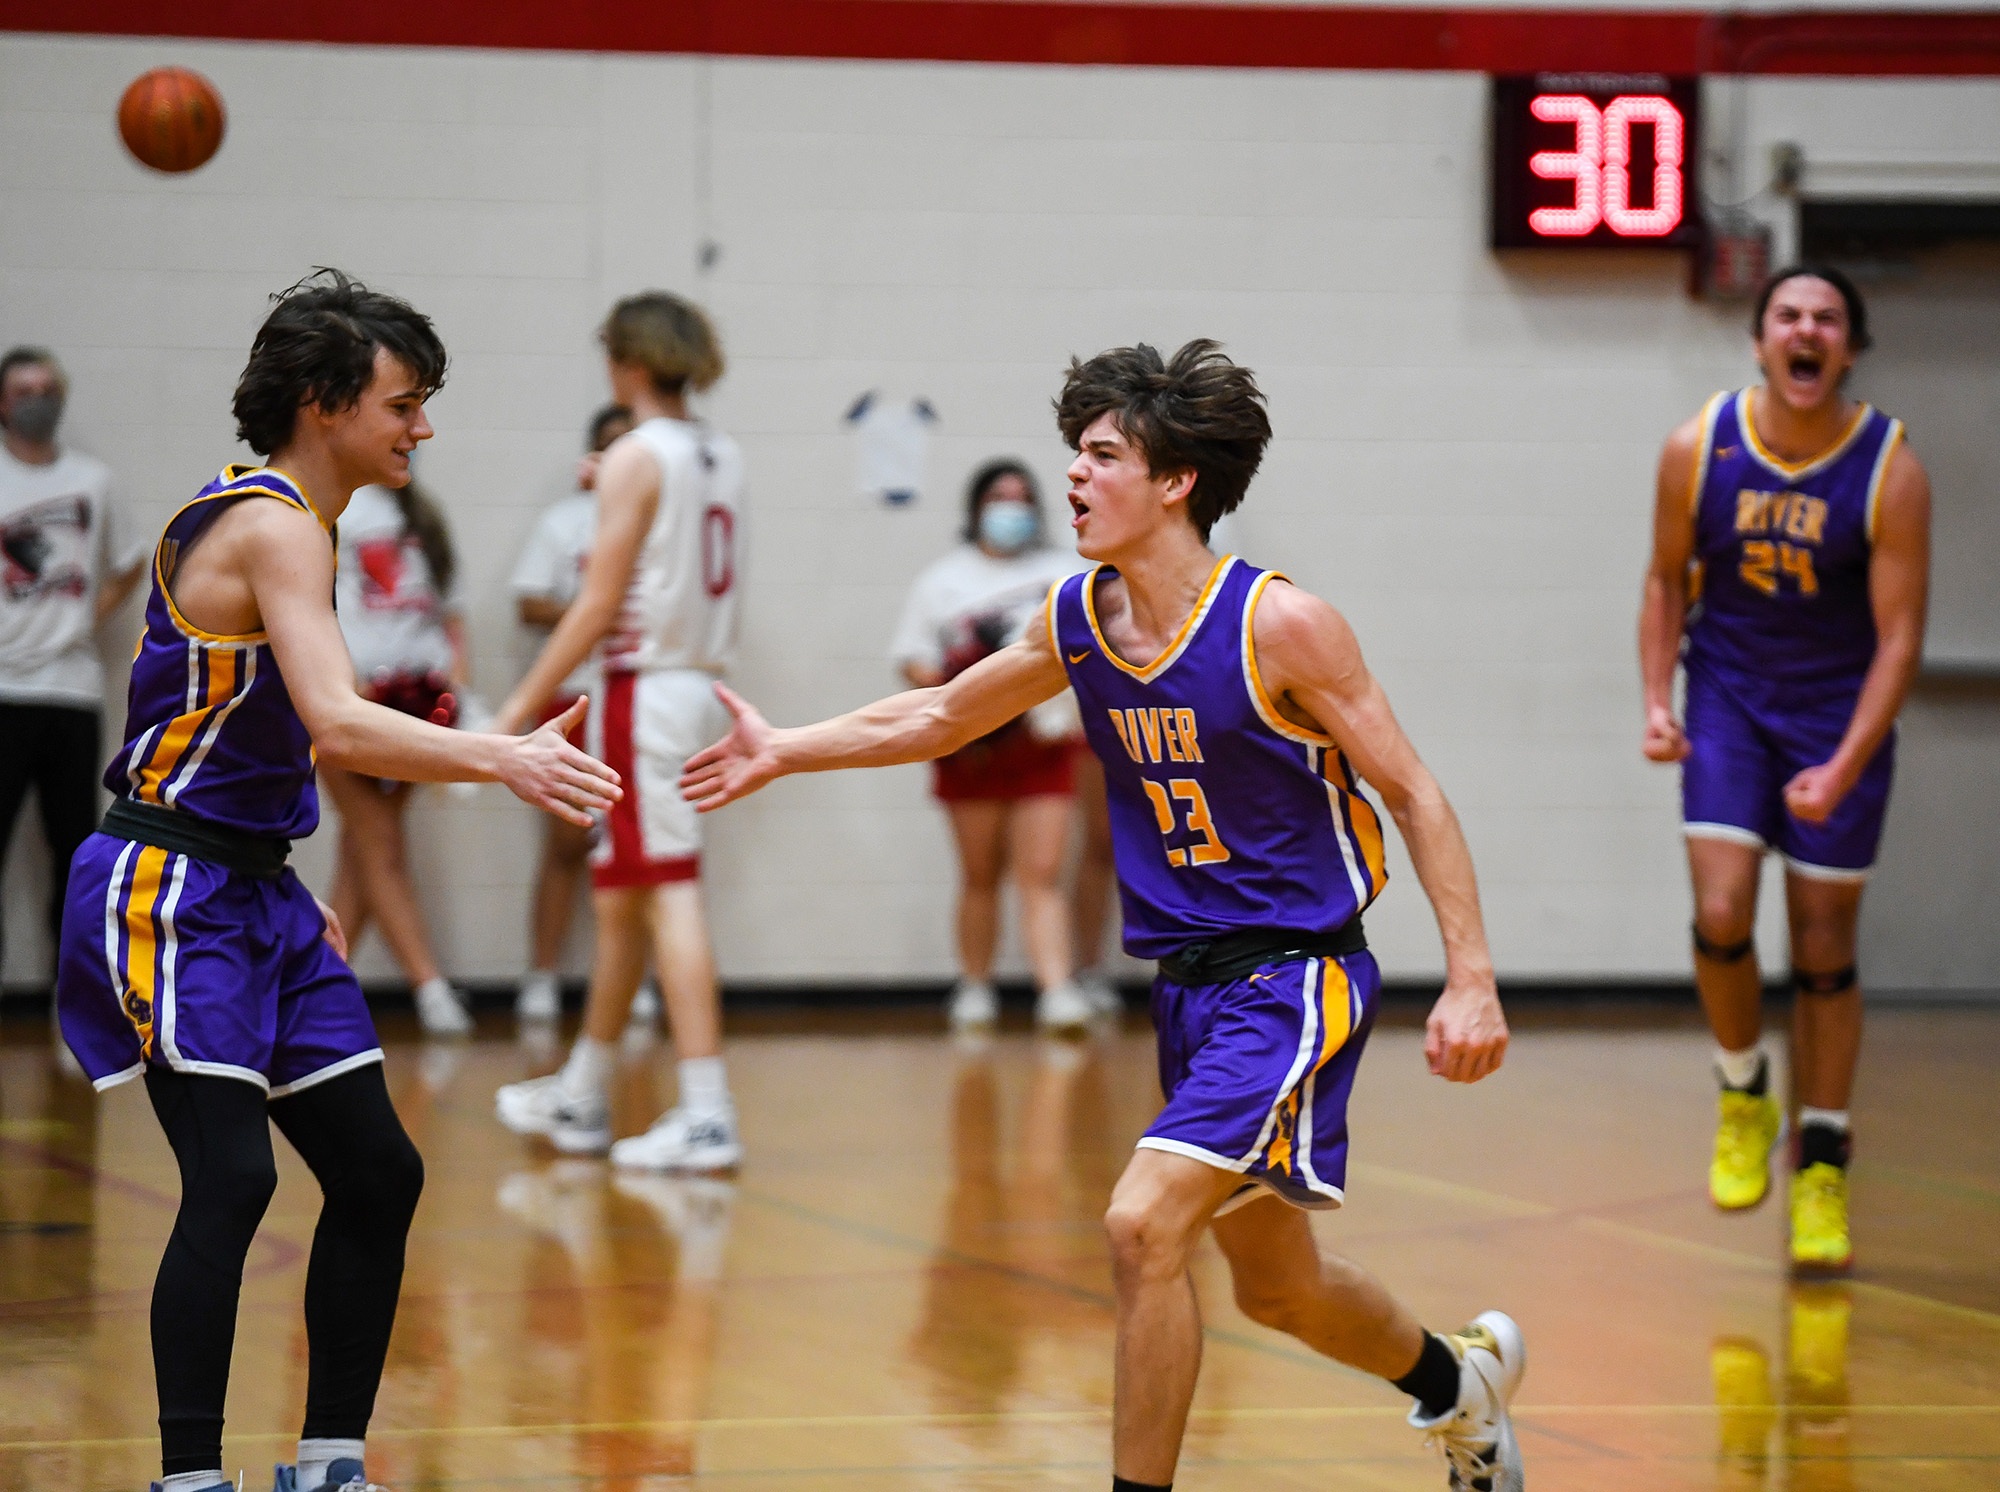 Columbia River freshman Aaron Hoey, center, celebrates a buzzer beater to end the first half with Columbia River freshman John Reeder, left, on Wednesday, Jan. 19, 2022, during the Rapids’ 48-38 win against the Trappers at Fort Vancouver High School.